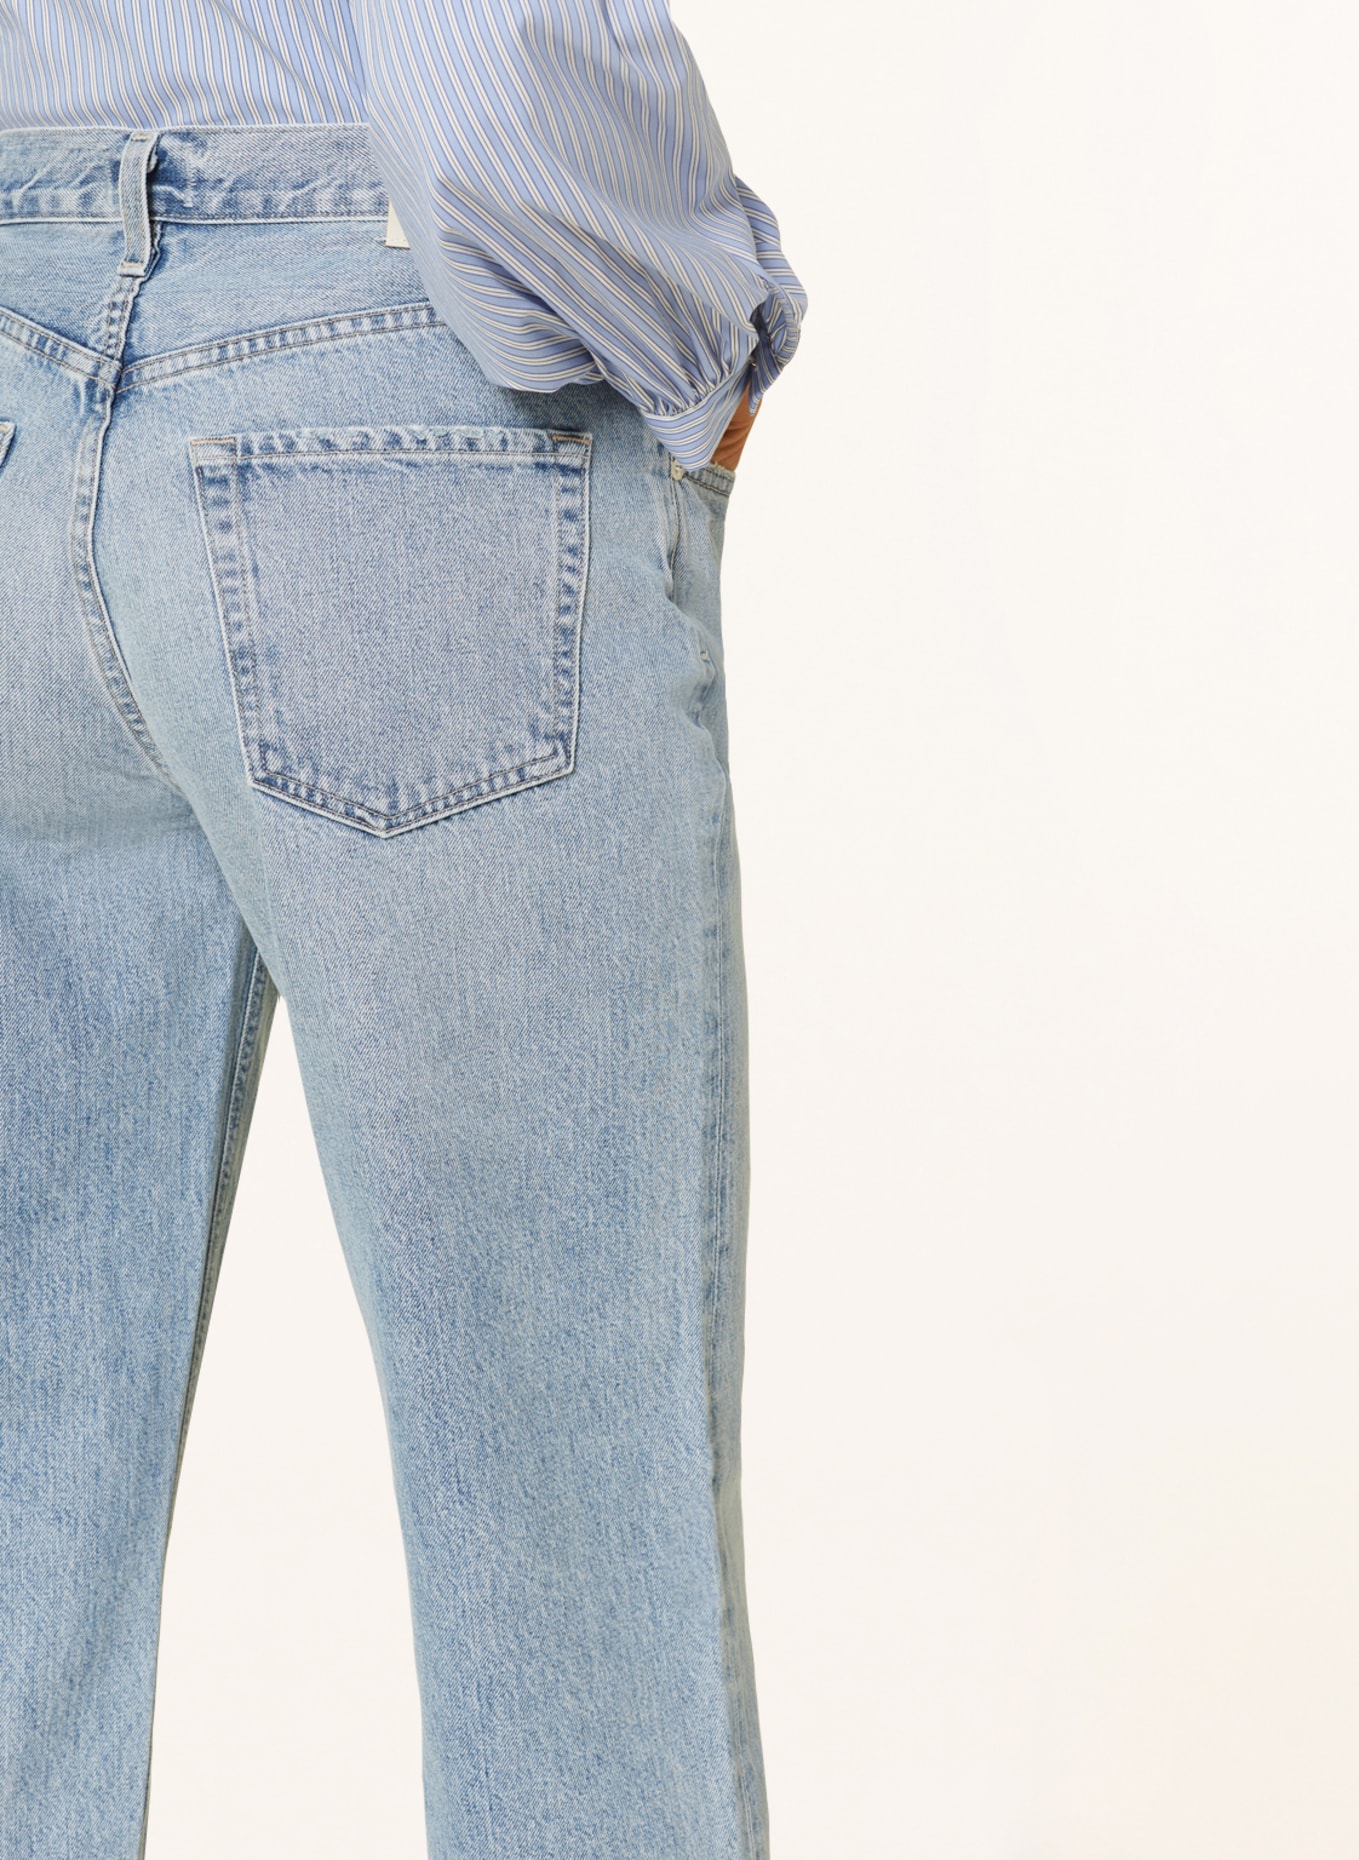 CITIZENS of HUMANITY Jeans DEVI, Color: Weatherly md indigo (Image 5)